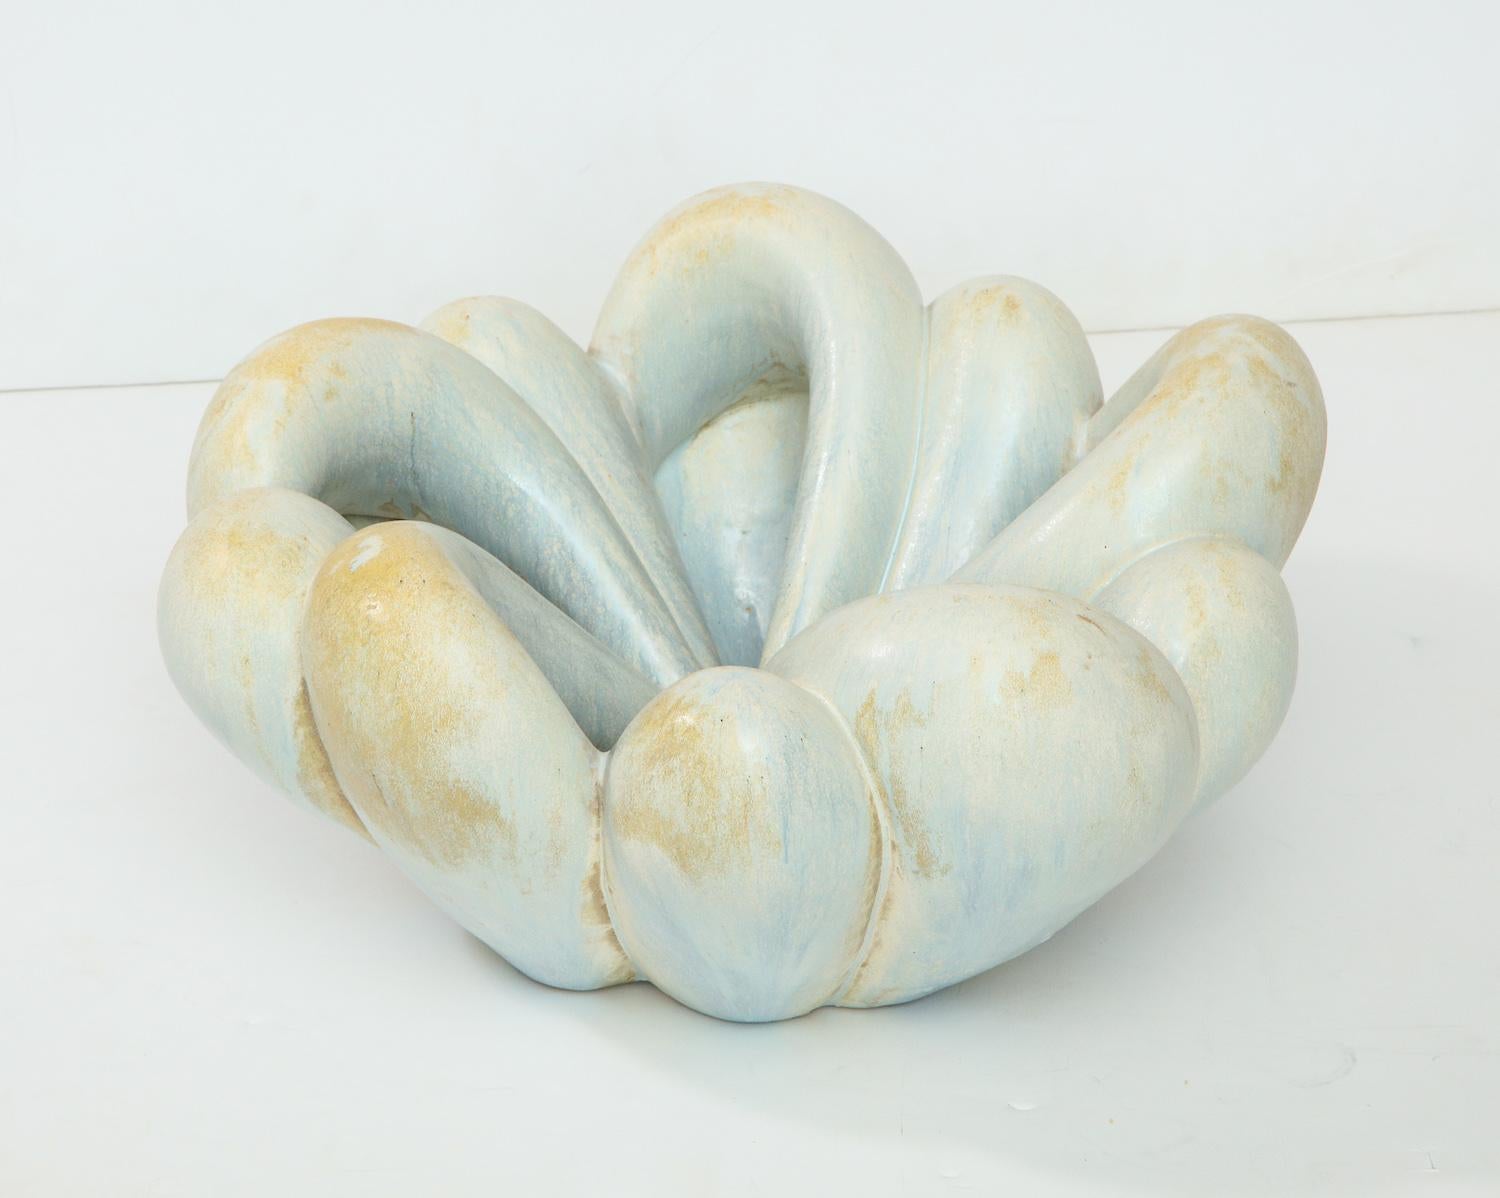 Hand-built stoneware vessel with bulbous ends and channeled design. Pale blue & brown glazes with interior glaze pooling.
  